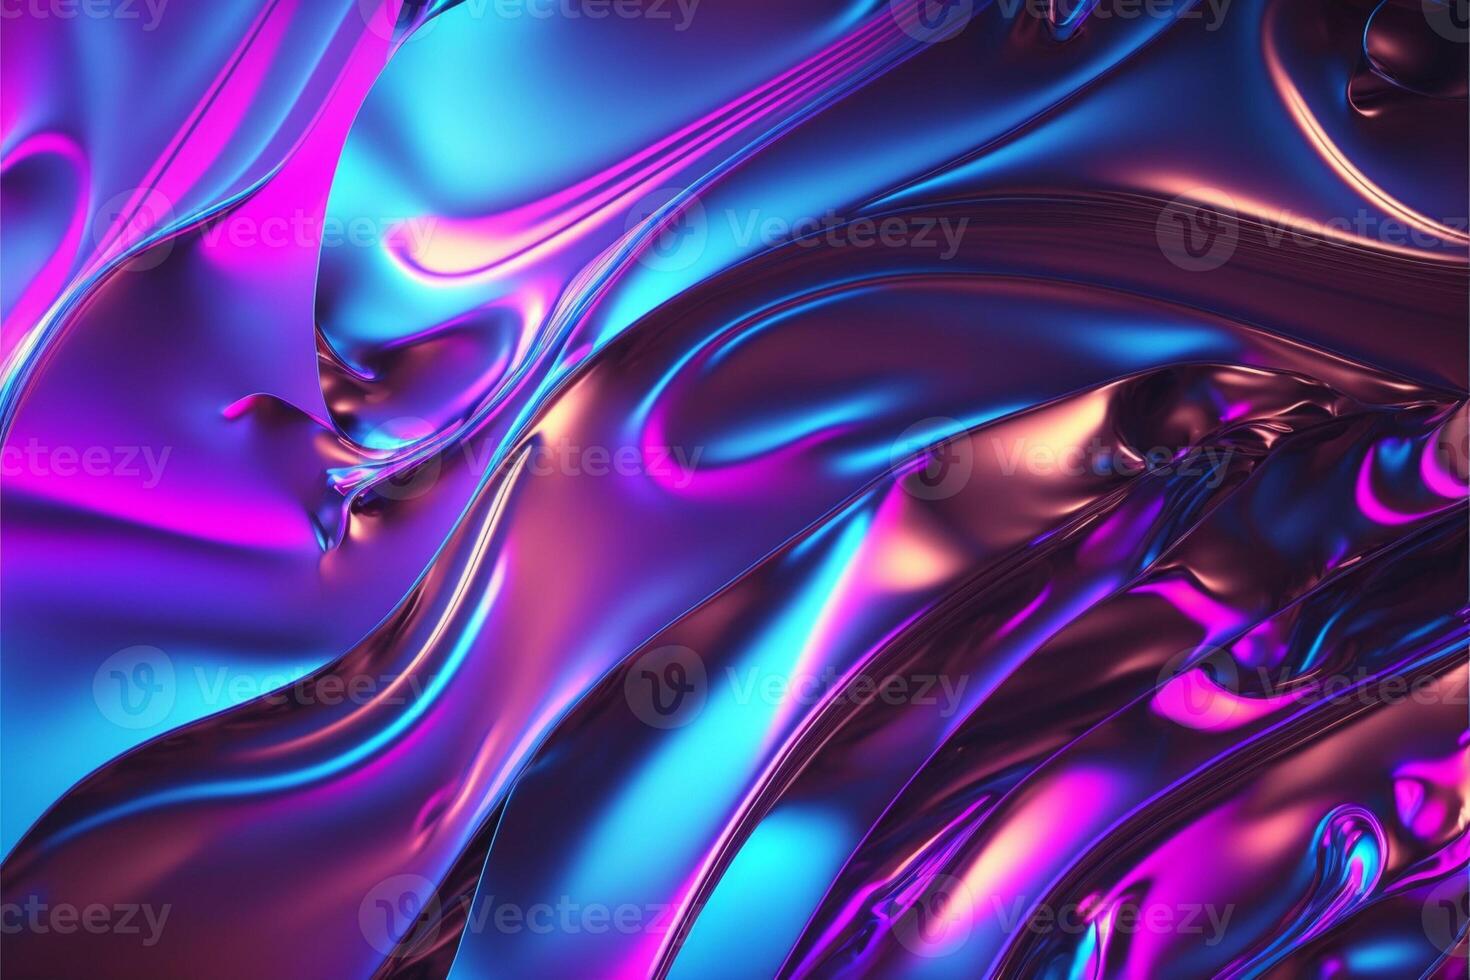 Neon background foil with purple and blue light. photo